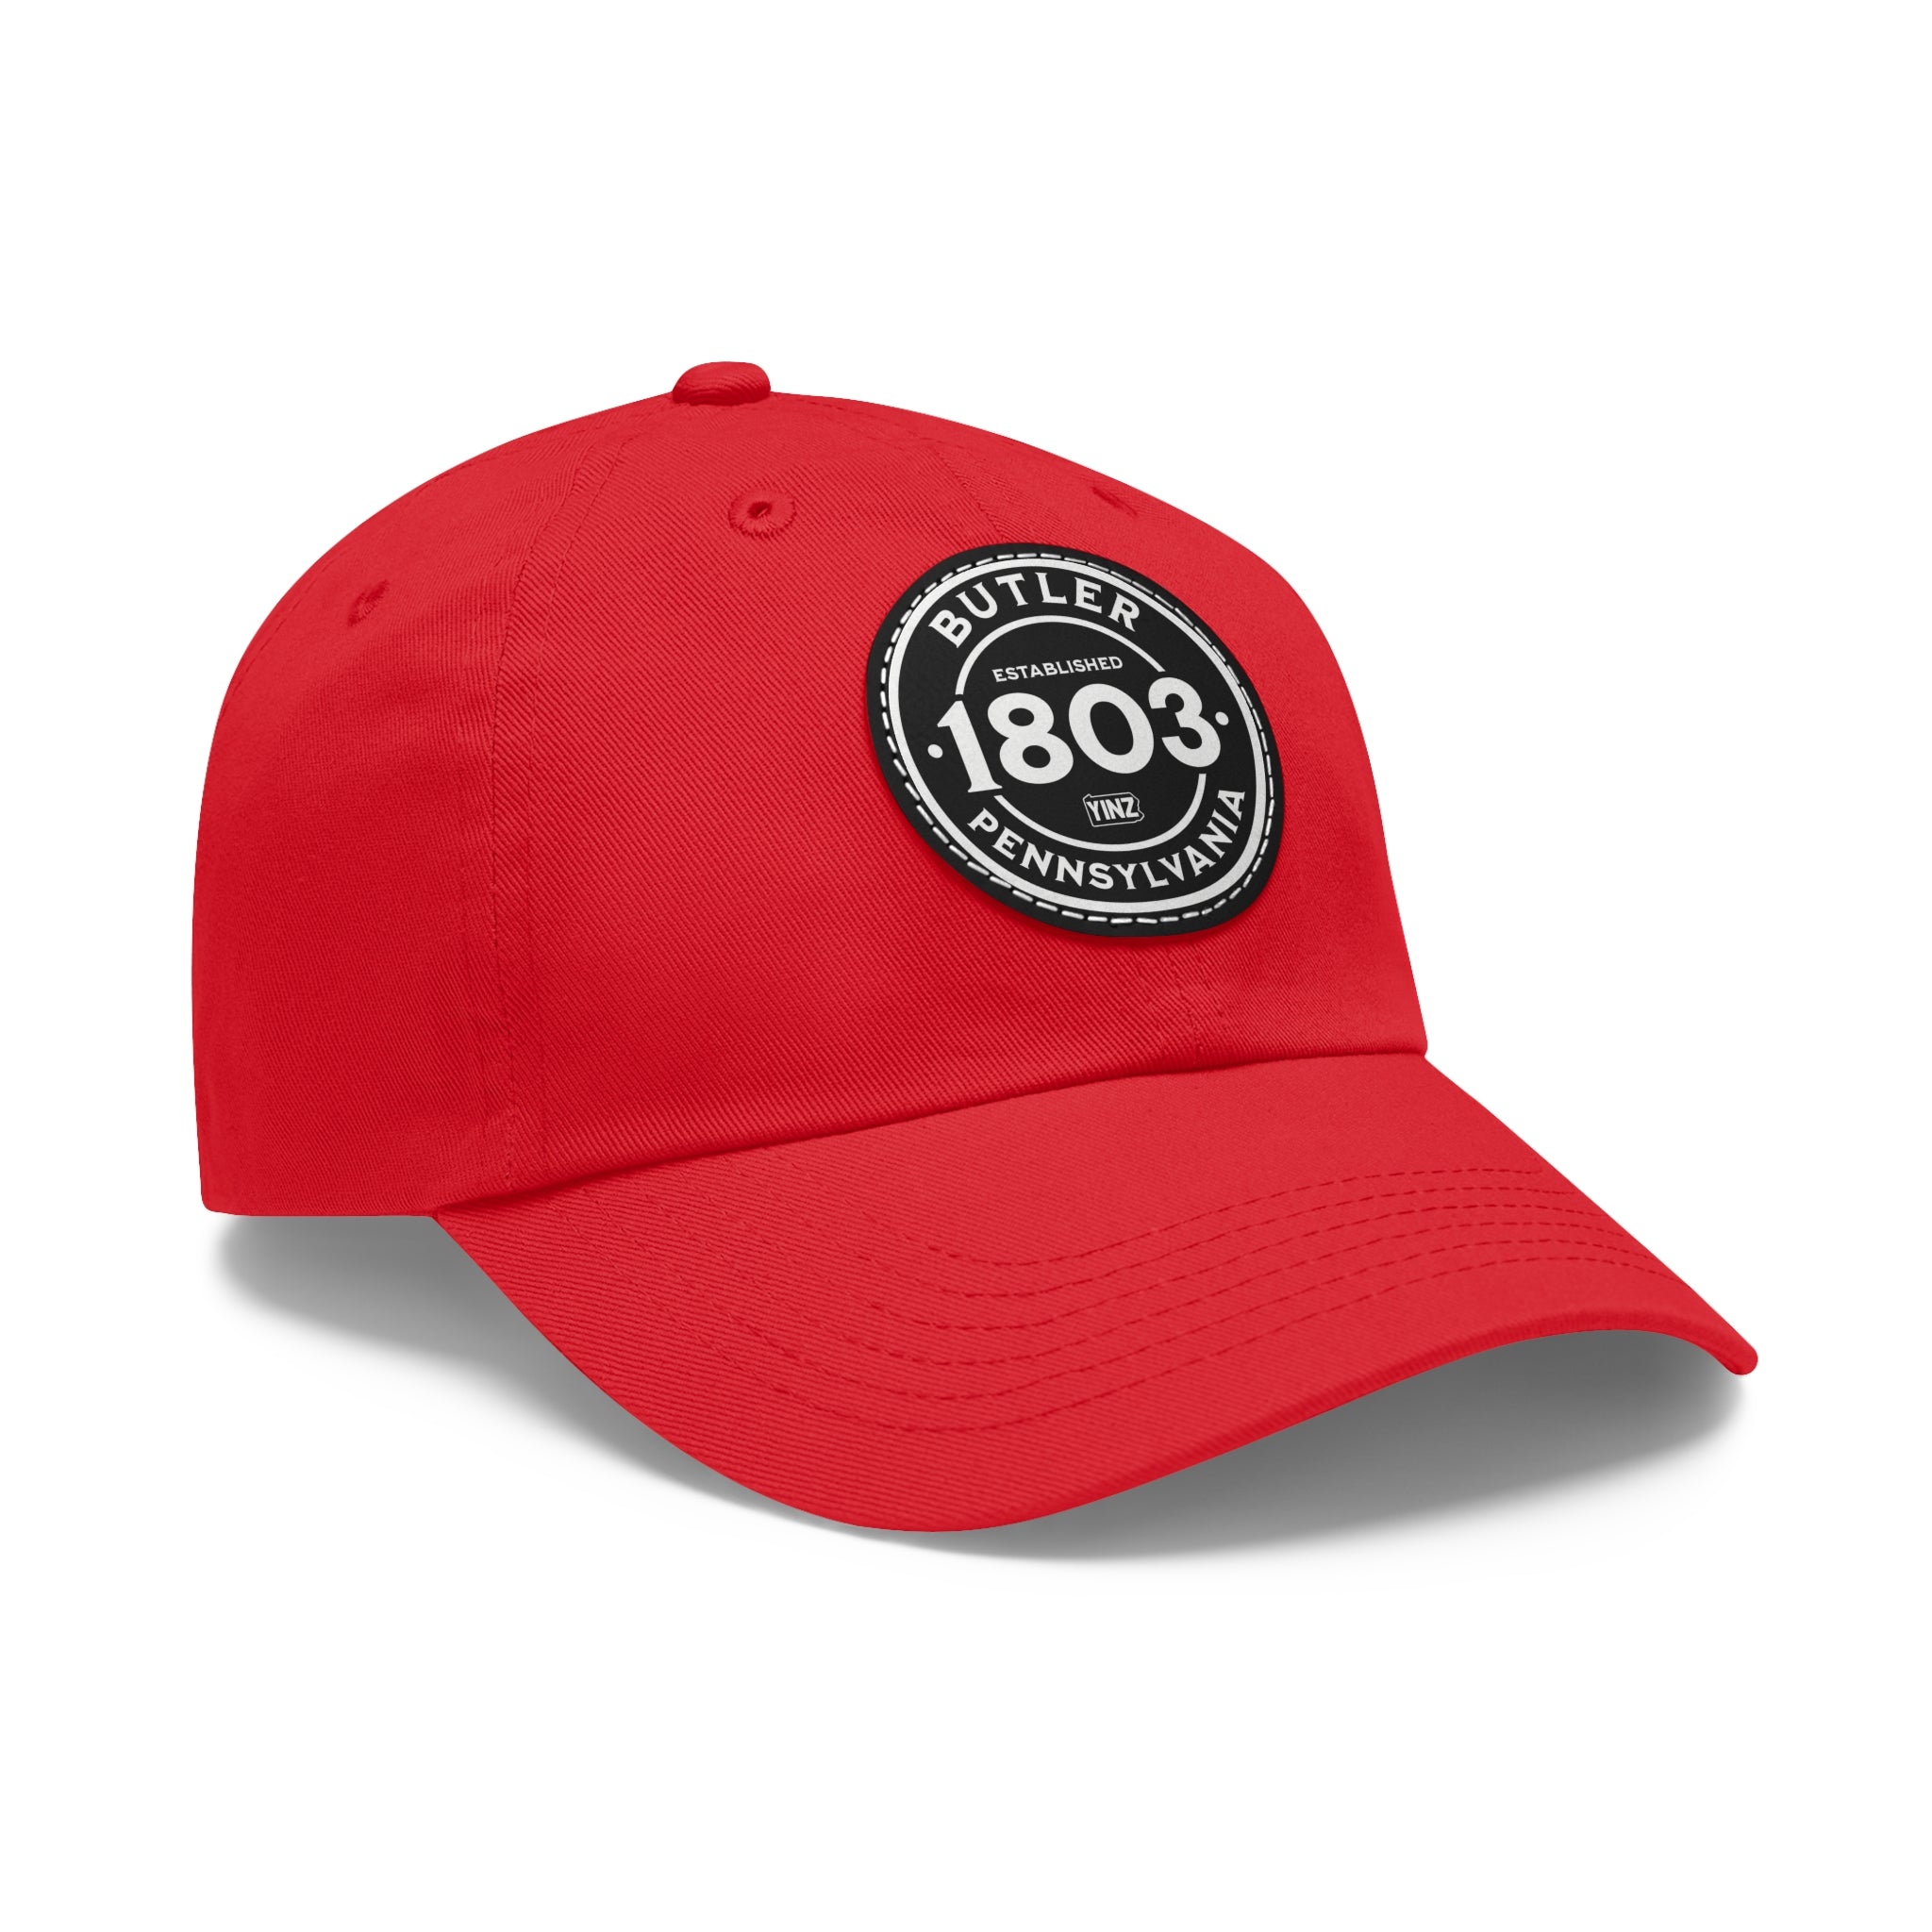 Butler 1803 Founders Patch Hat - Yinzylvania